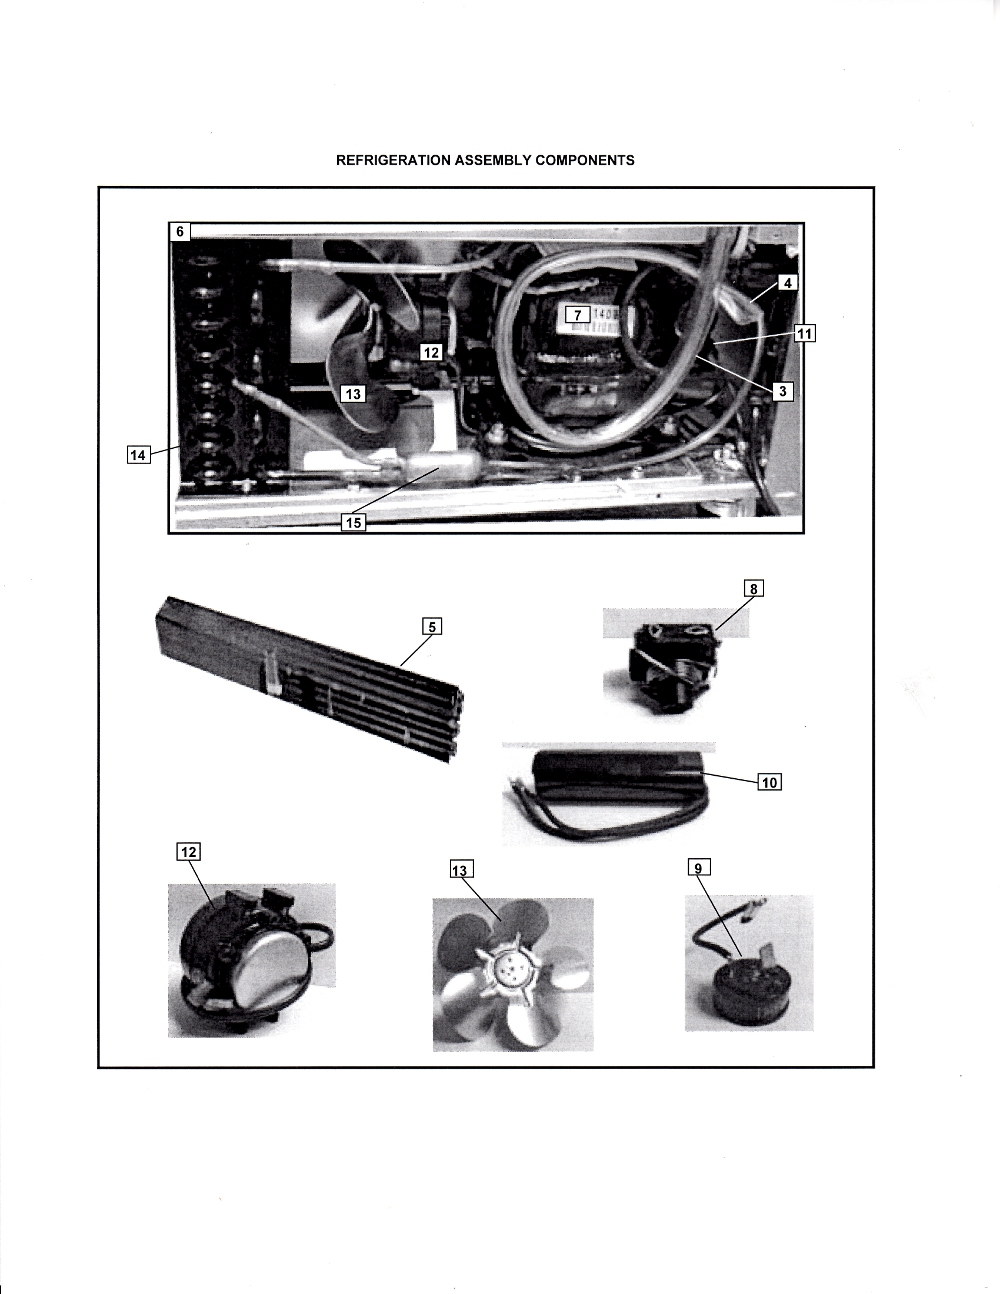 Refrigeration Assembly Components